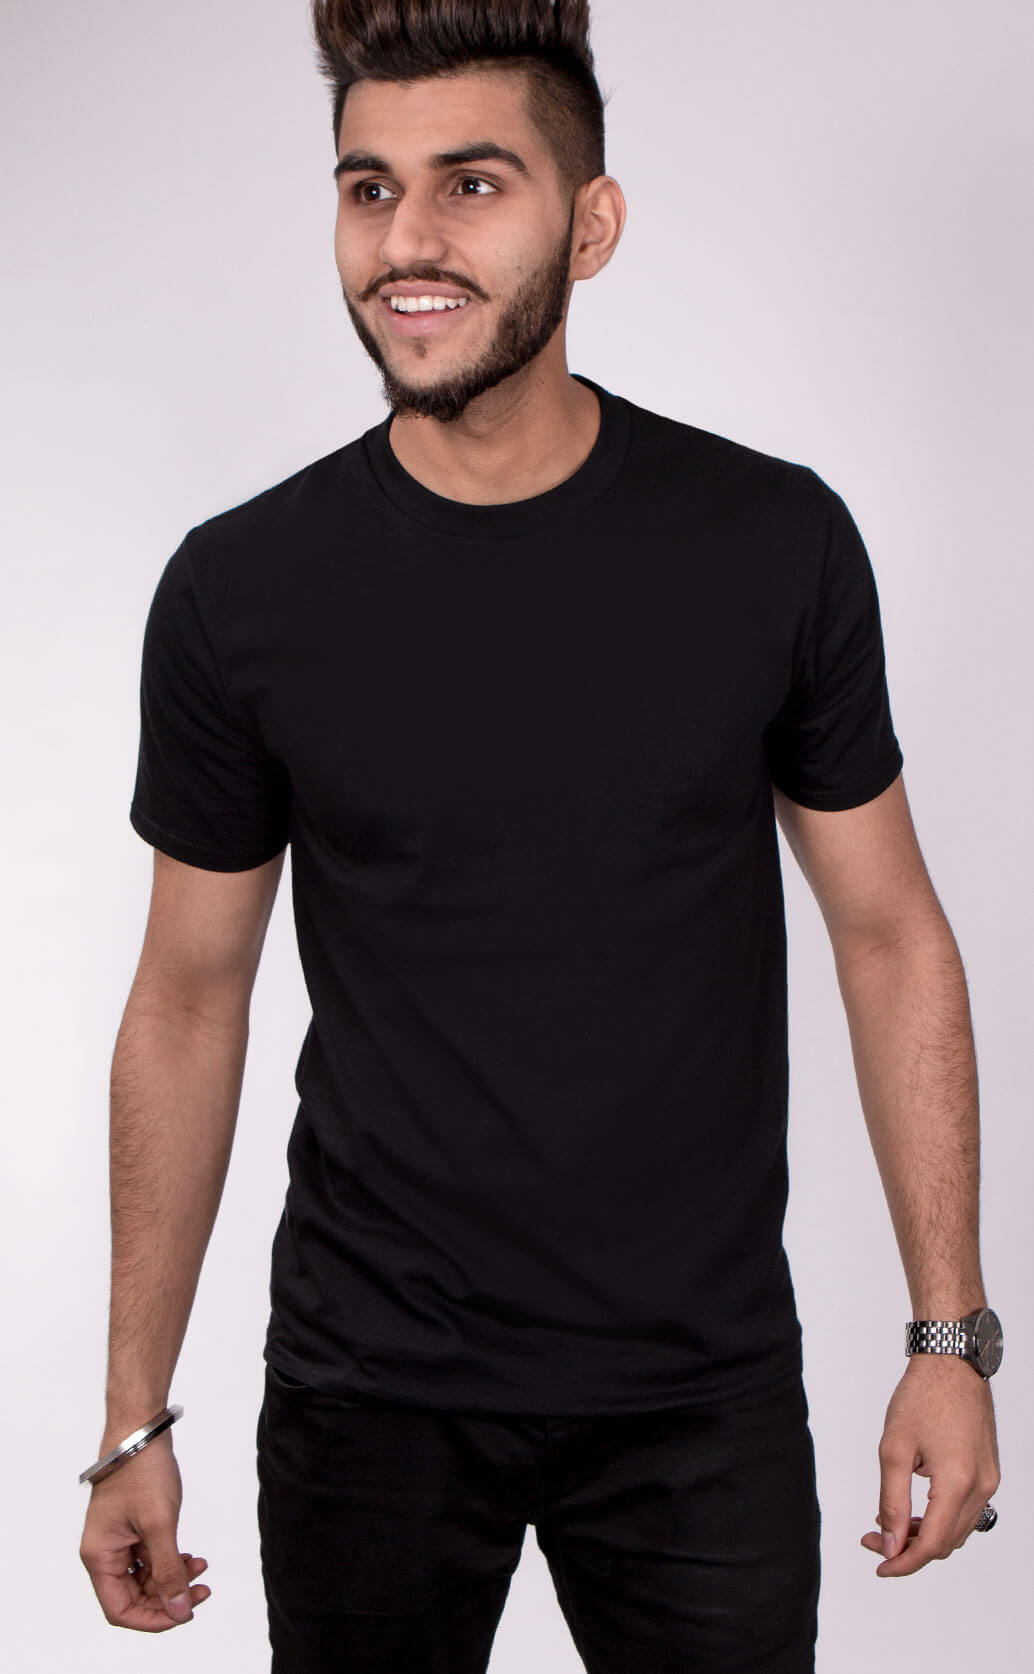 Size guide image for Mens Casual shirt type. Model is dressed in black